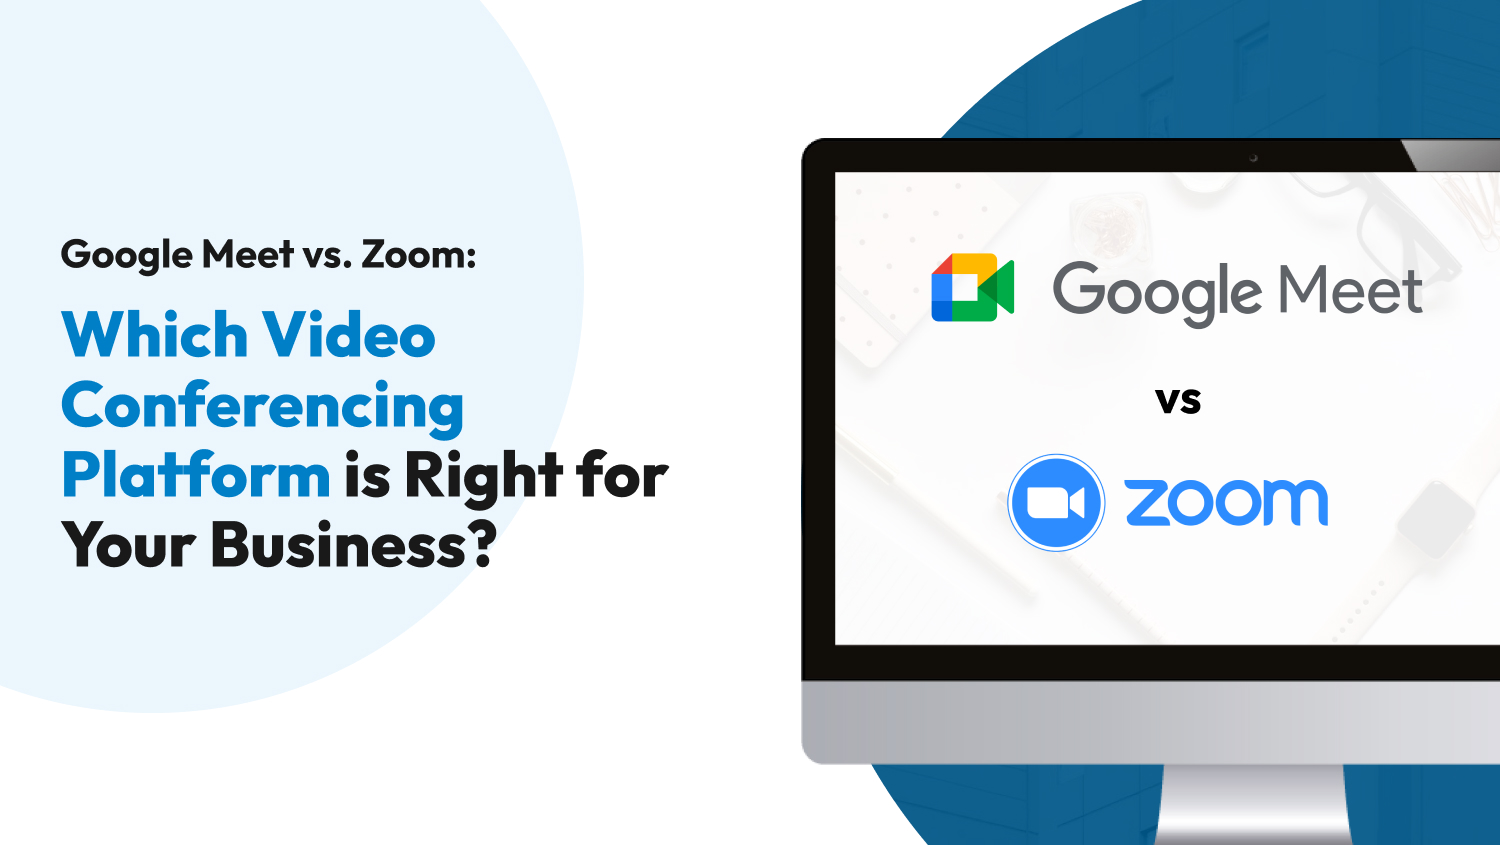 Google Meet vs. Zoom: Which Video Conferencing Platform is Right for Your Business?